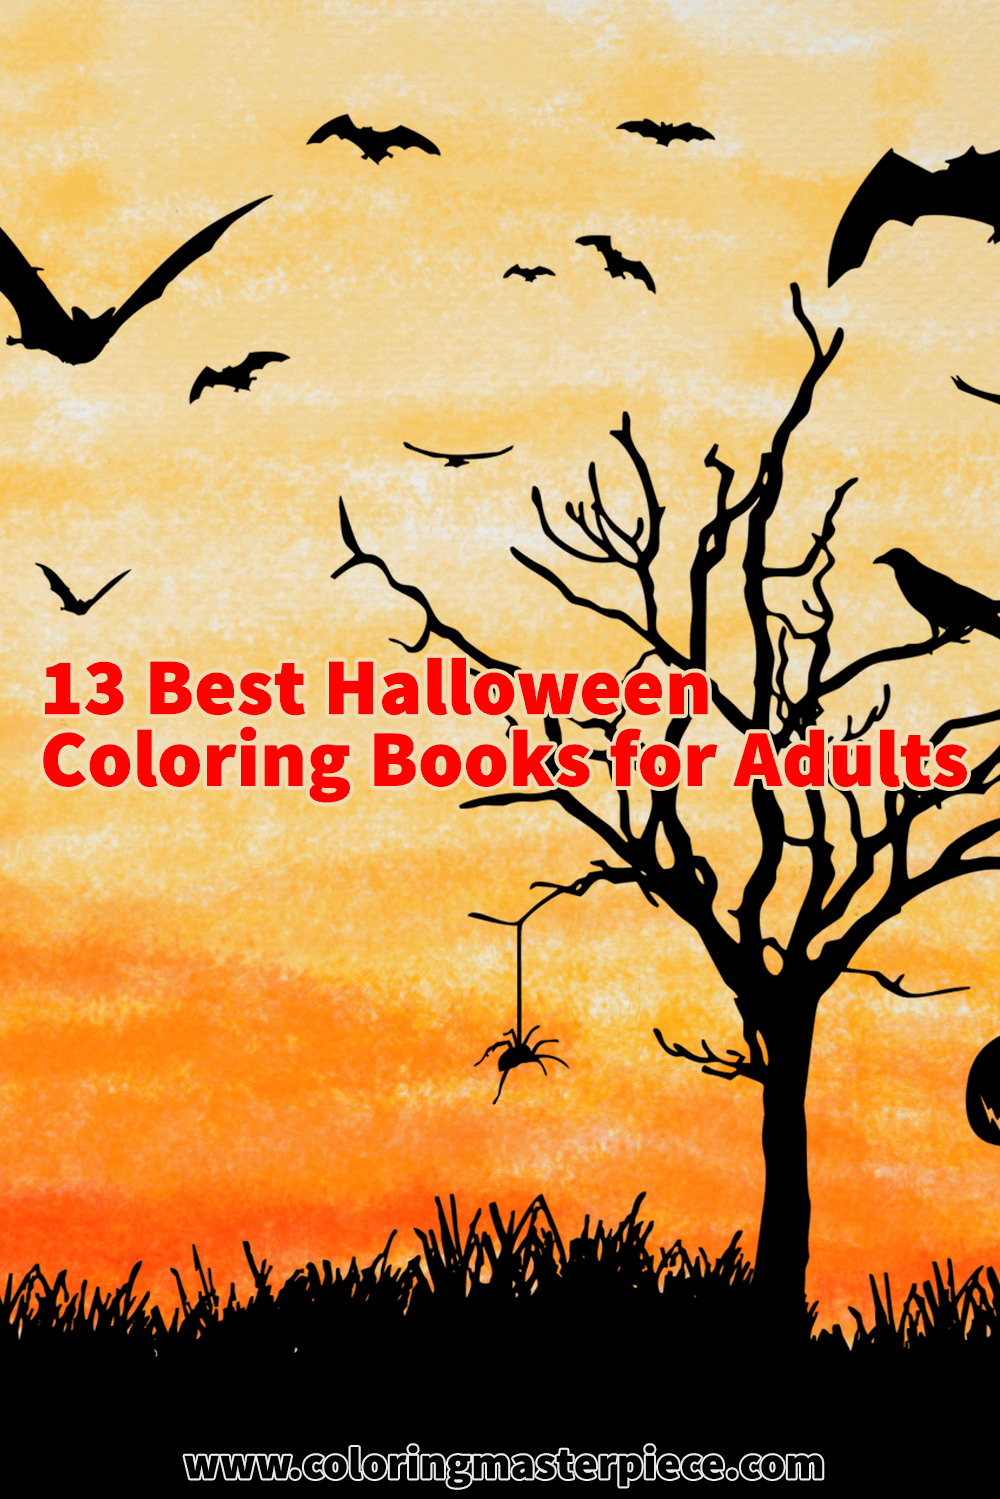 13-best-halloween-coloring-books-for-adults-adult-coloring-masterpiece